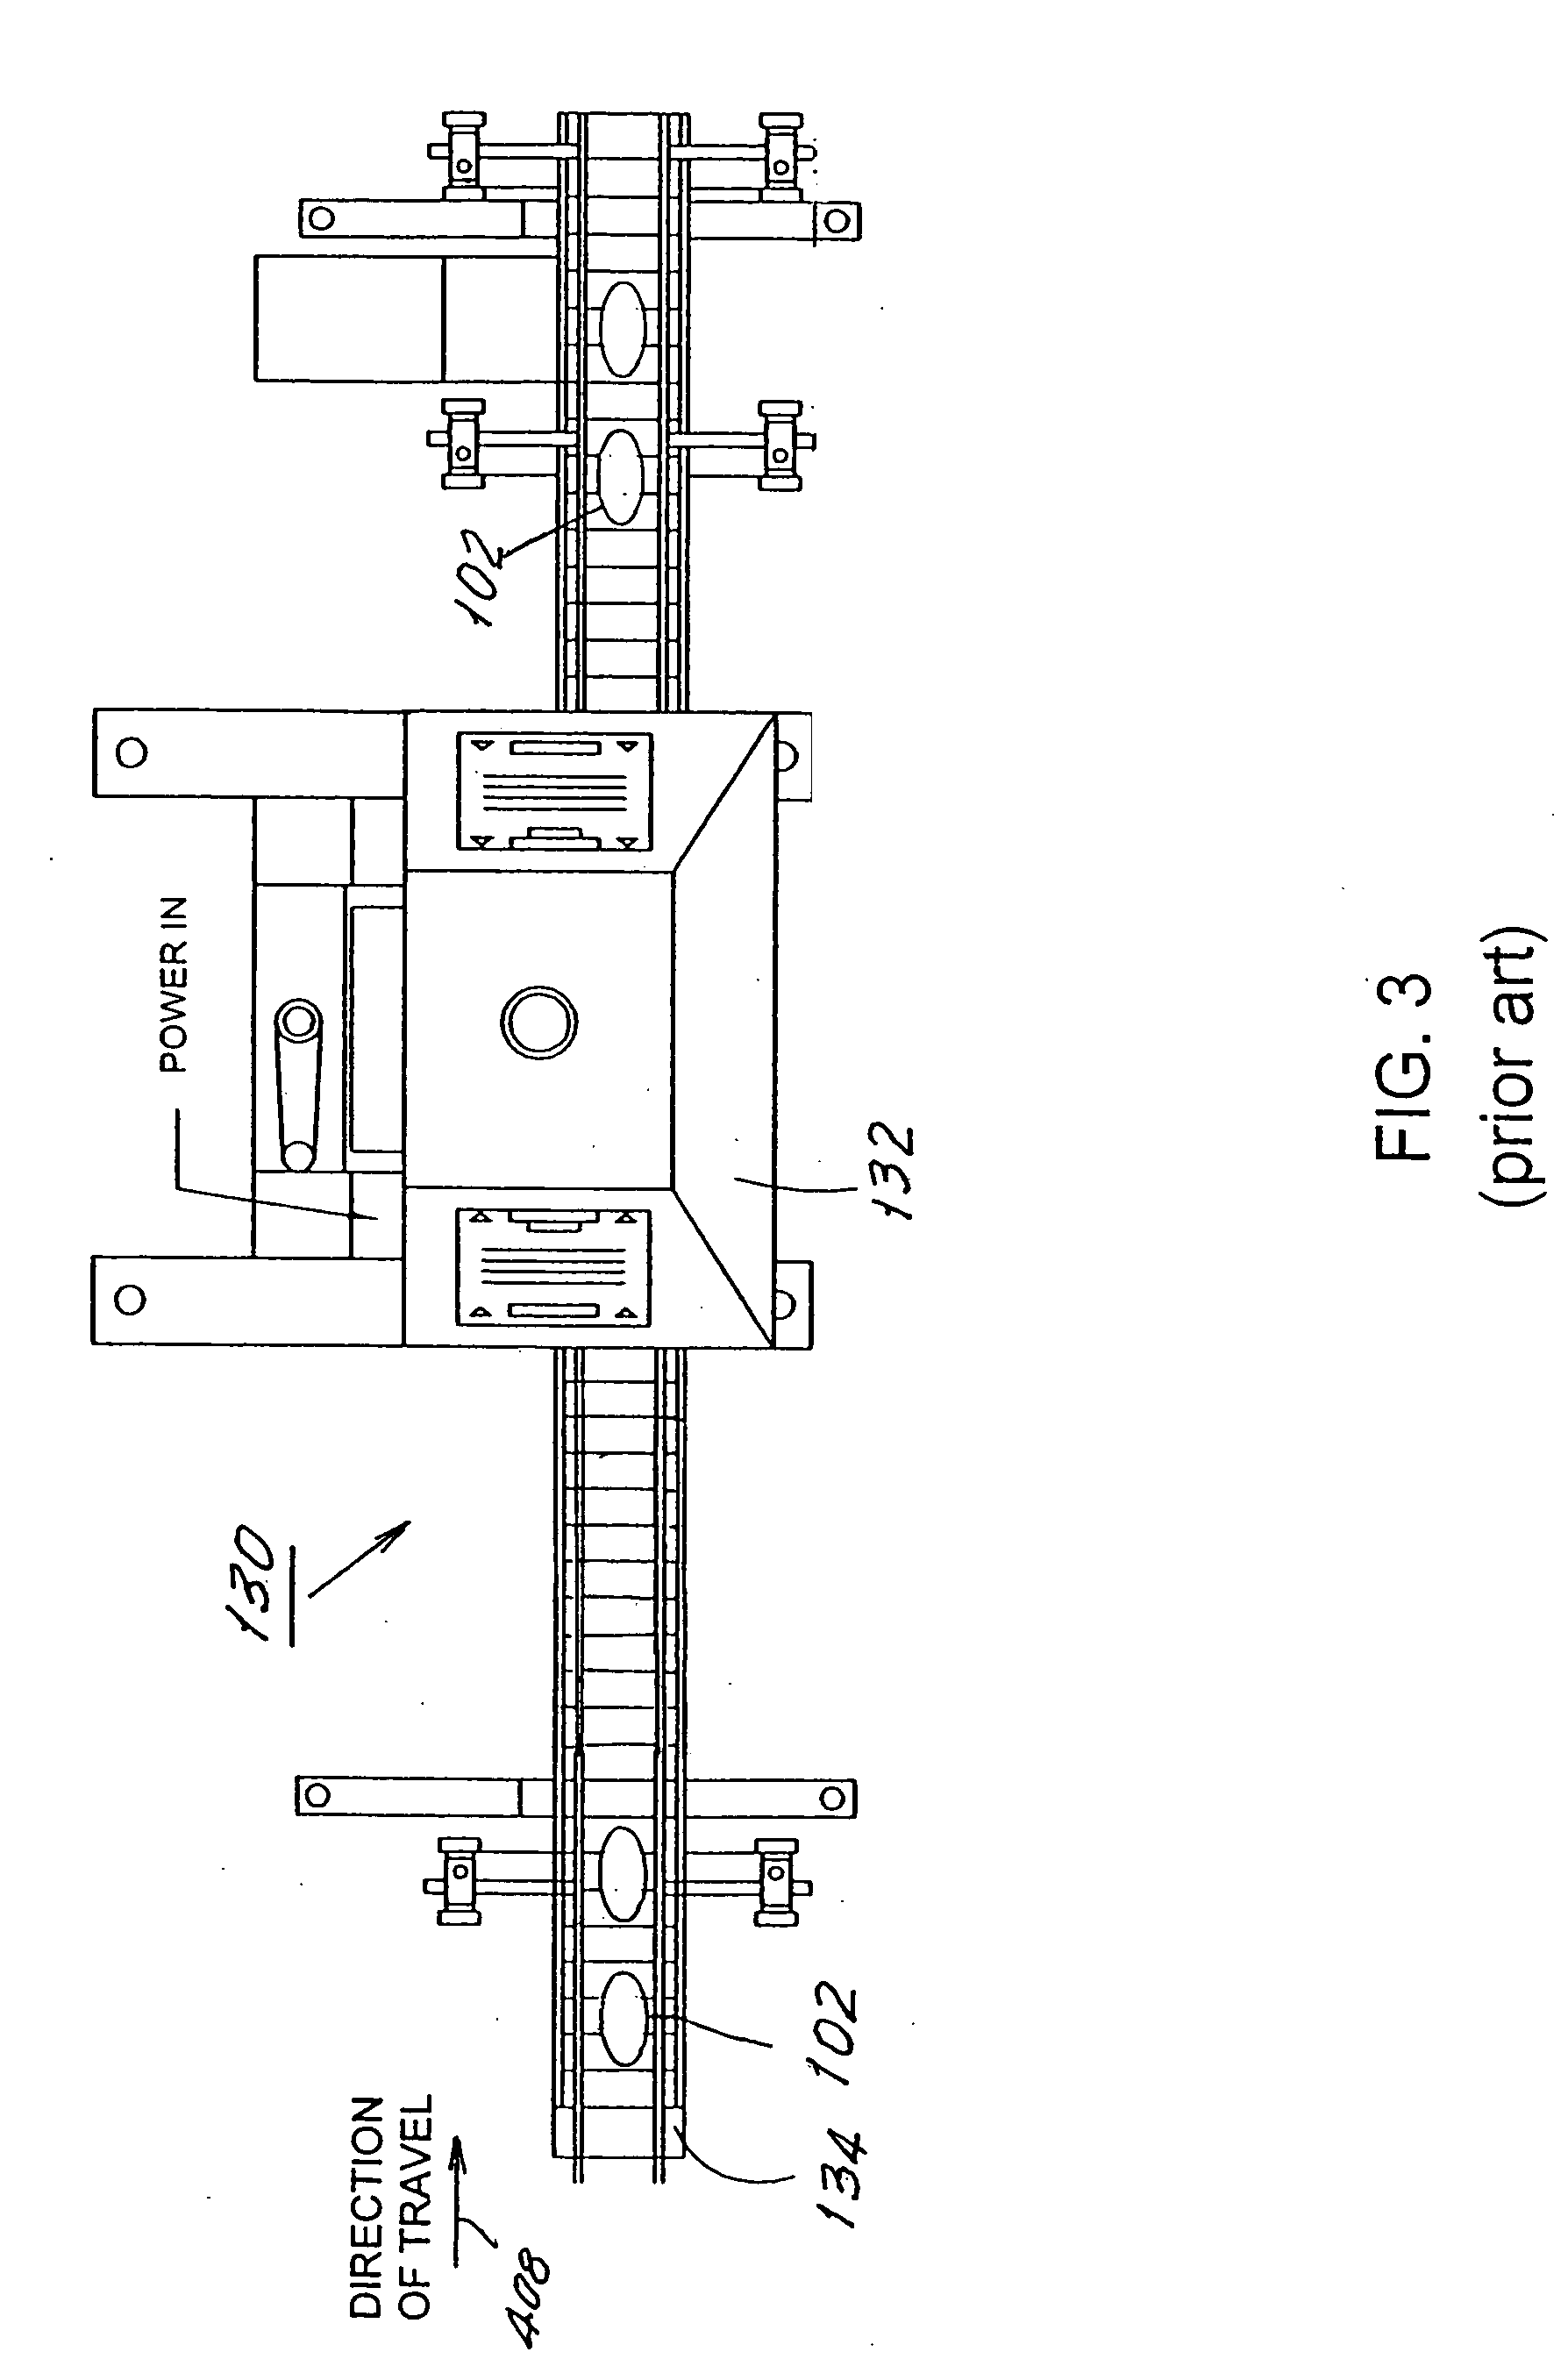 Monitoring system for induction sealer